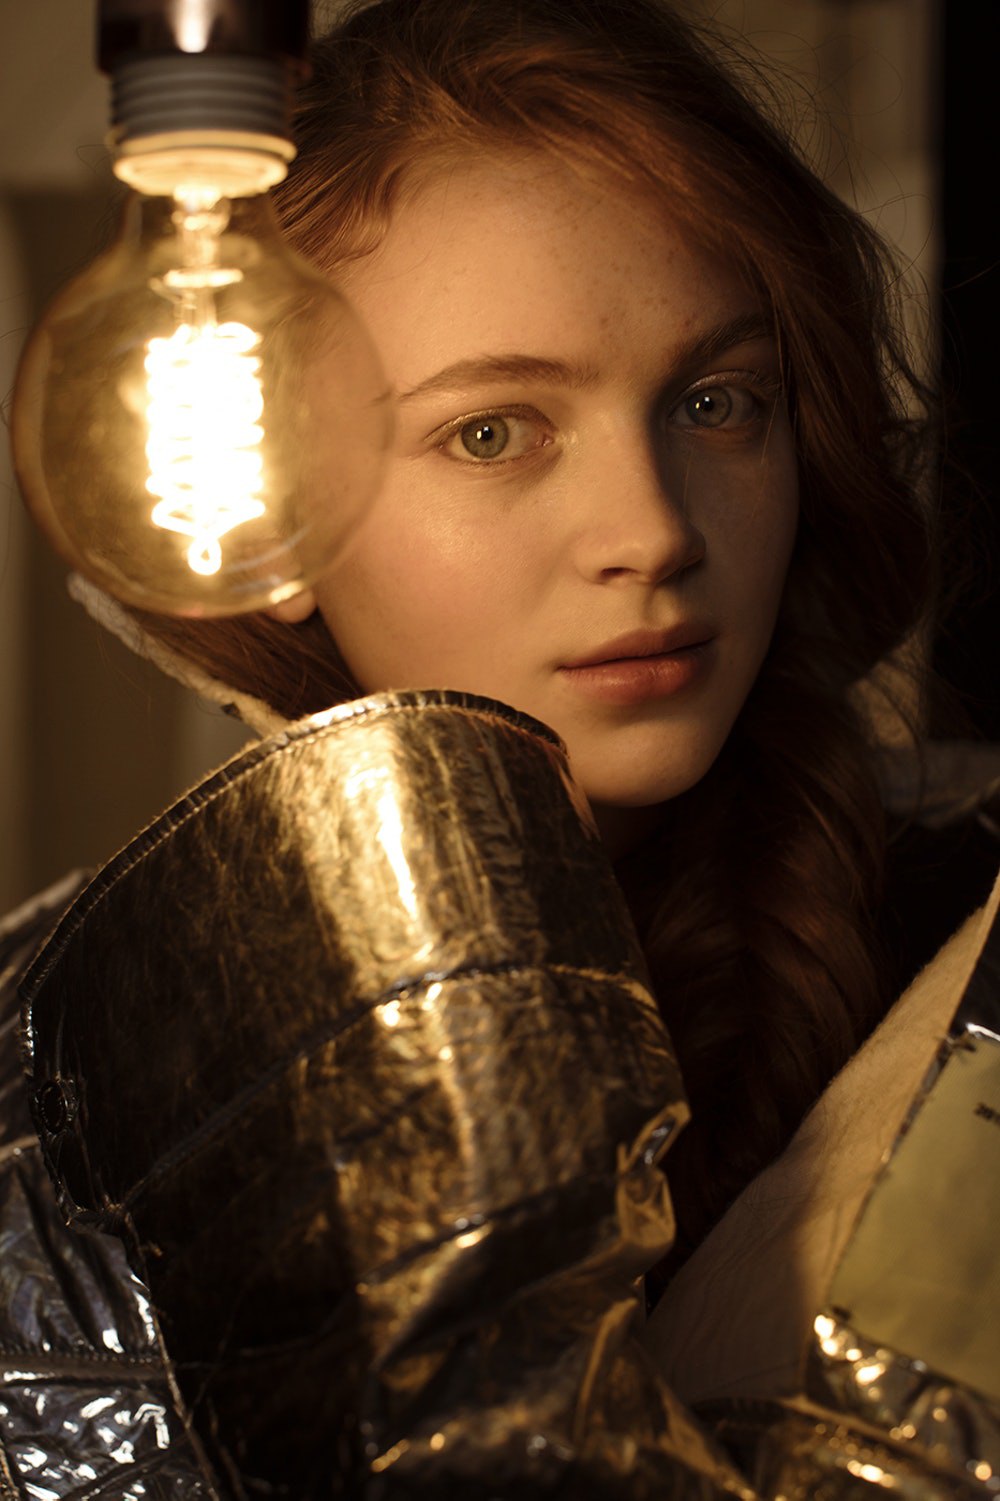 Sadie Sink Women Actress Looking At Viewer Redhead Freckles Reflection Light Bulb Braids 1000x1501